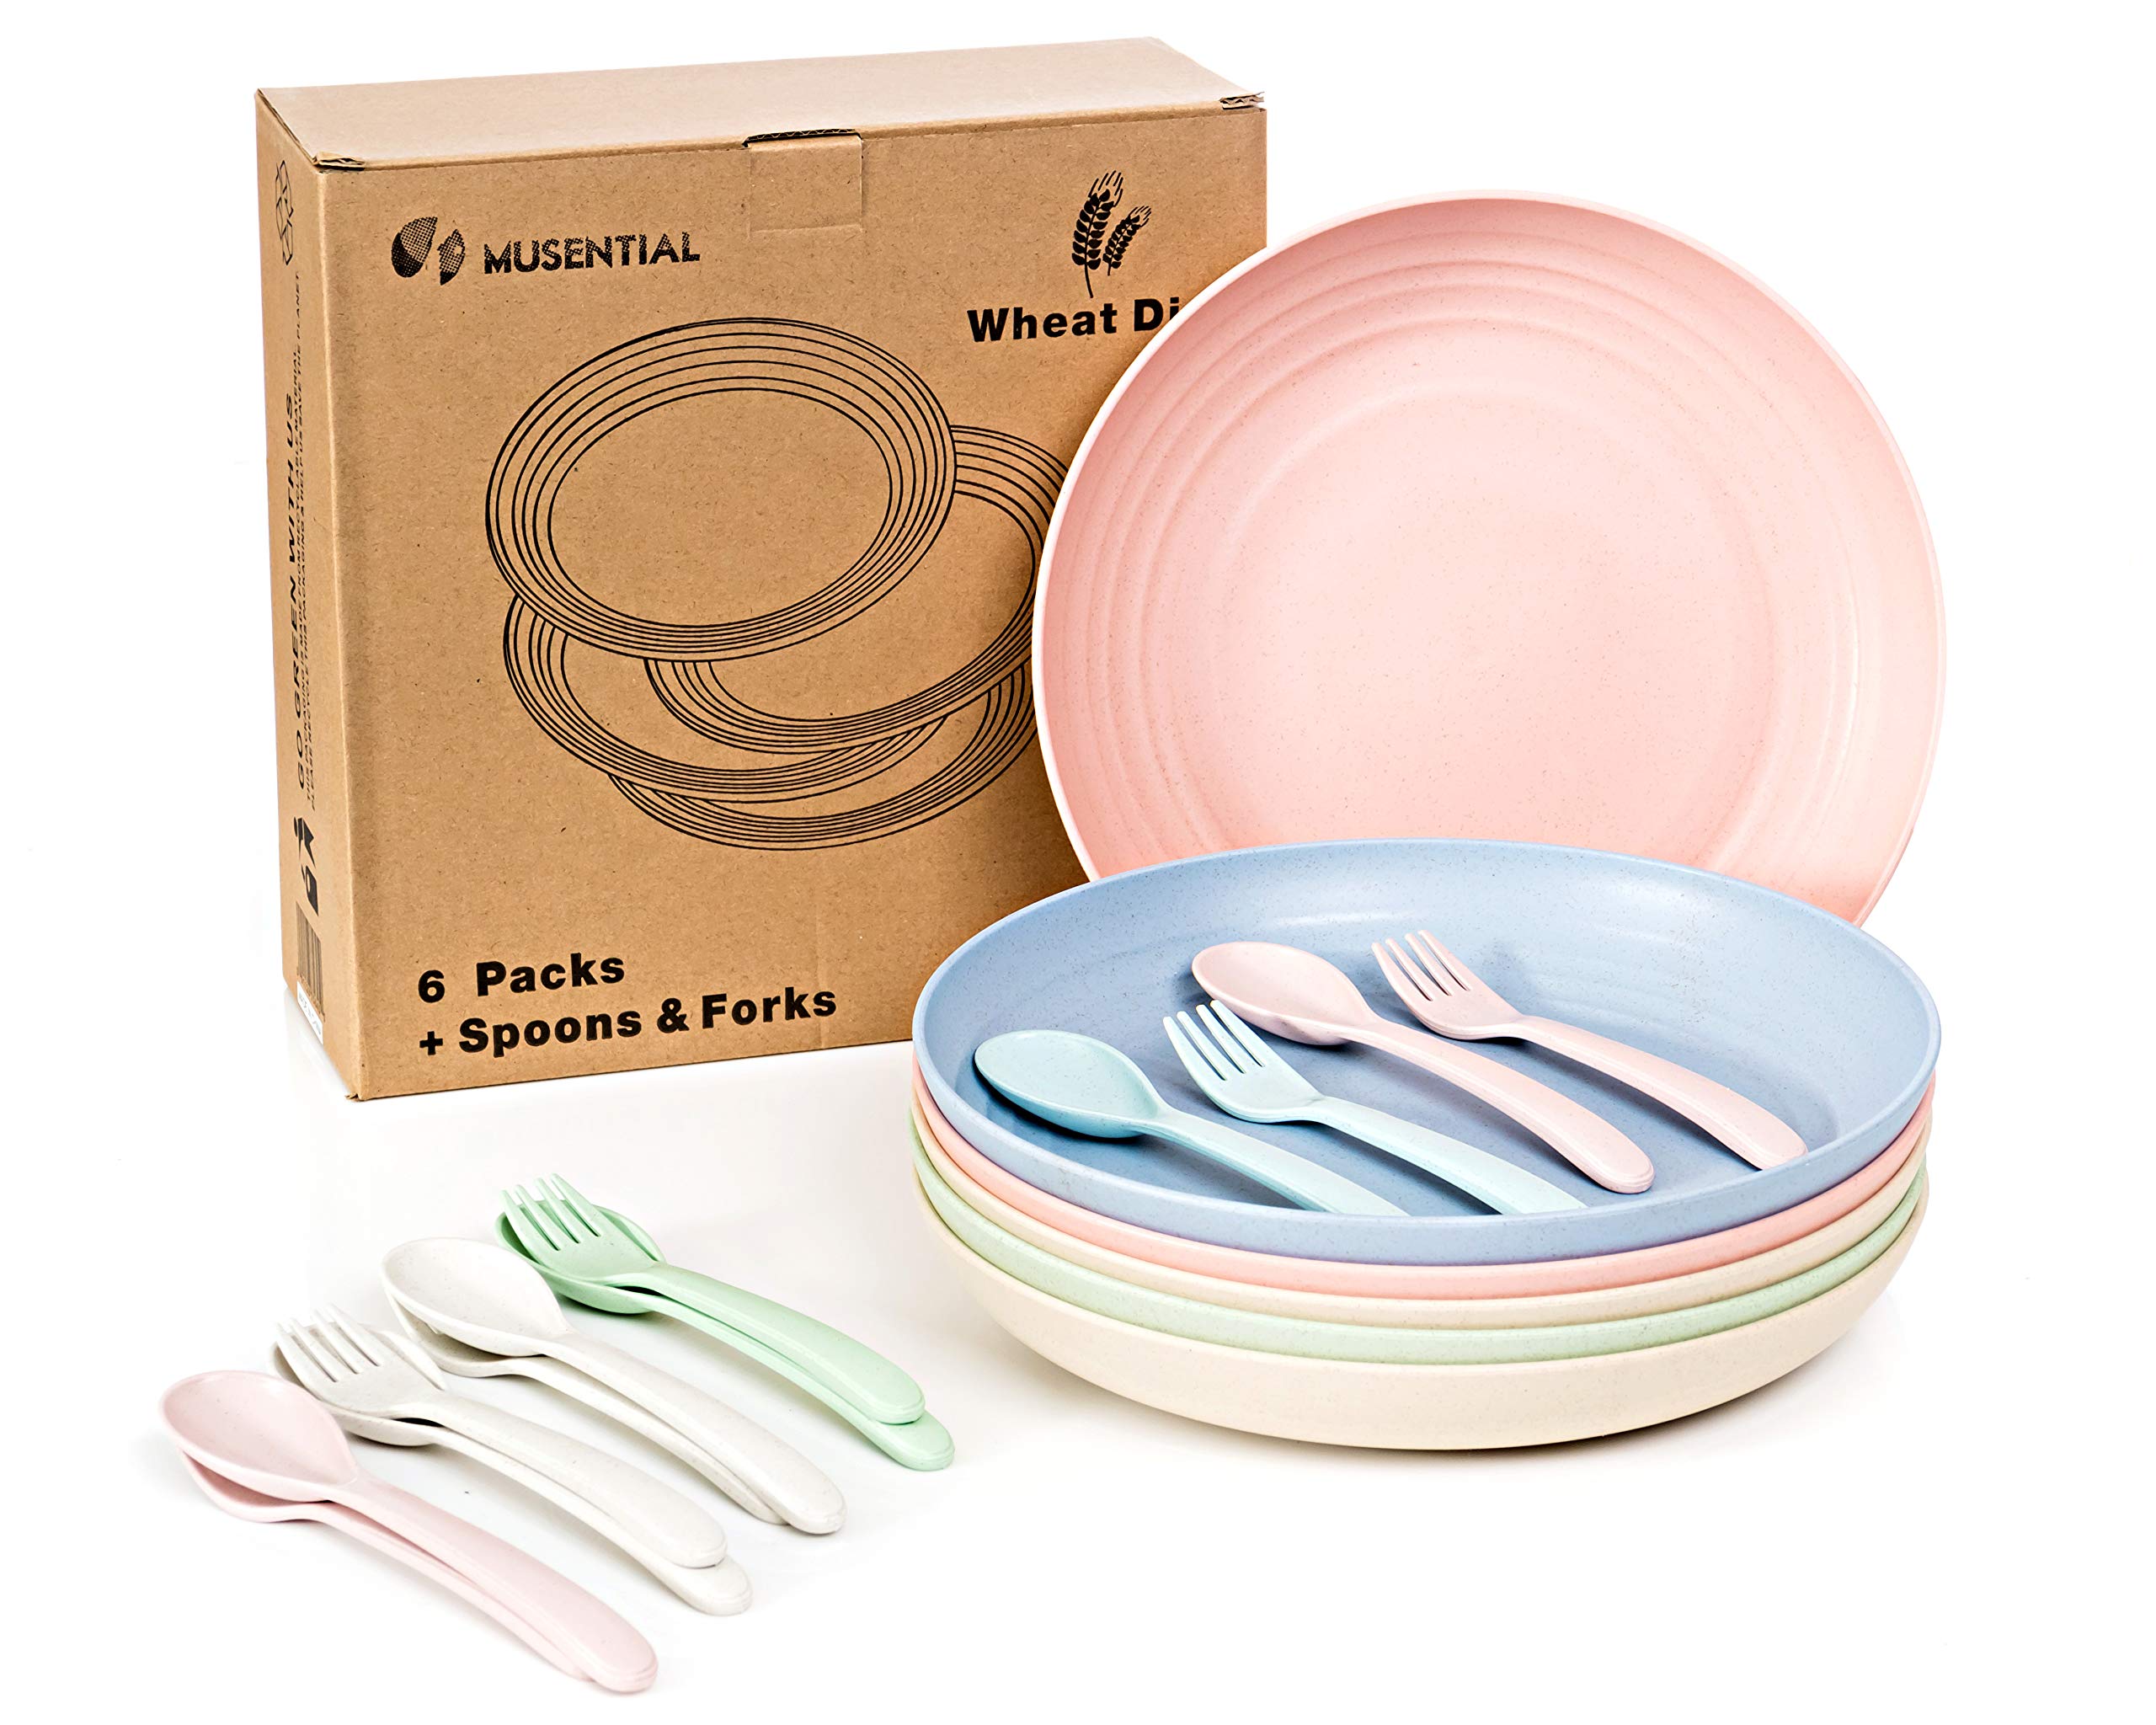 MUSENTIAL 10" Inch Wheat Straw Deep Dish Set (6 Dinner Dishes / Spoons & Forks ) - Dishwasher & Microwave Safe - Unbreakable Reusable Lightweight Eco Friendly & BPA Free Dinnerware